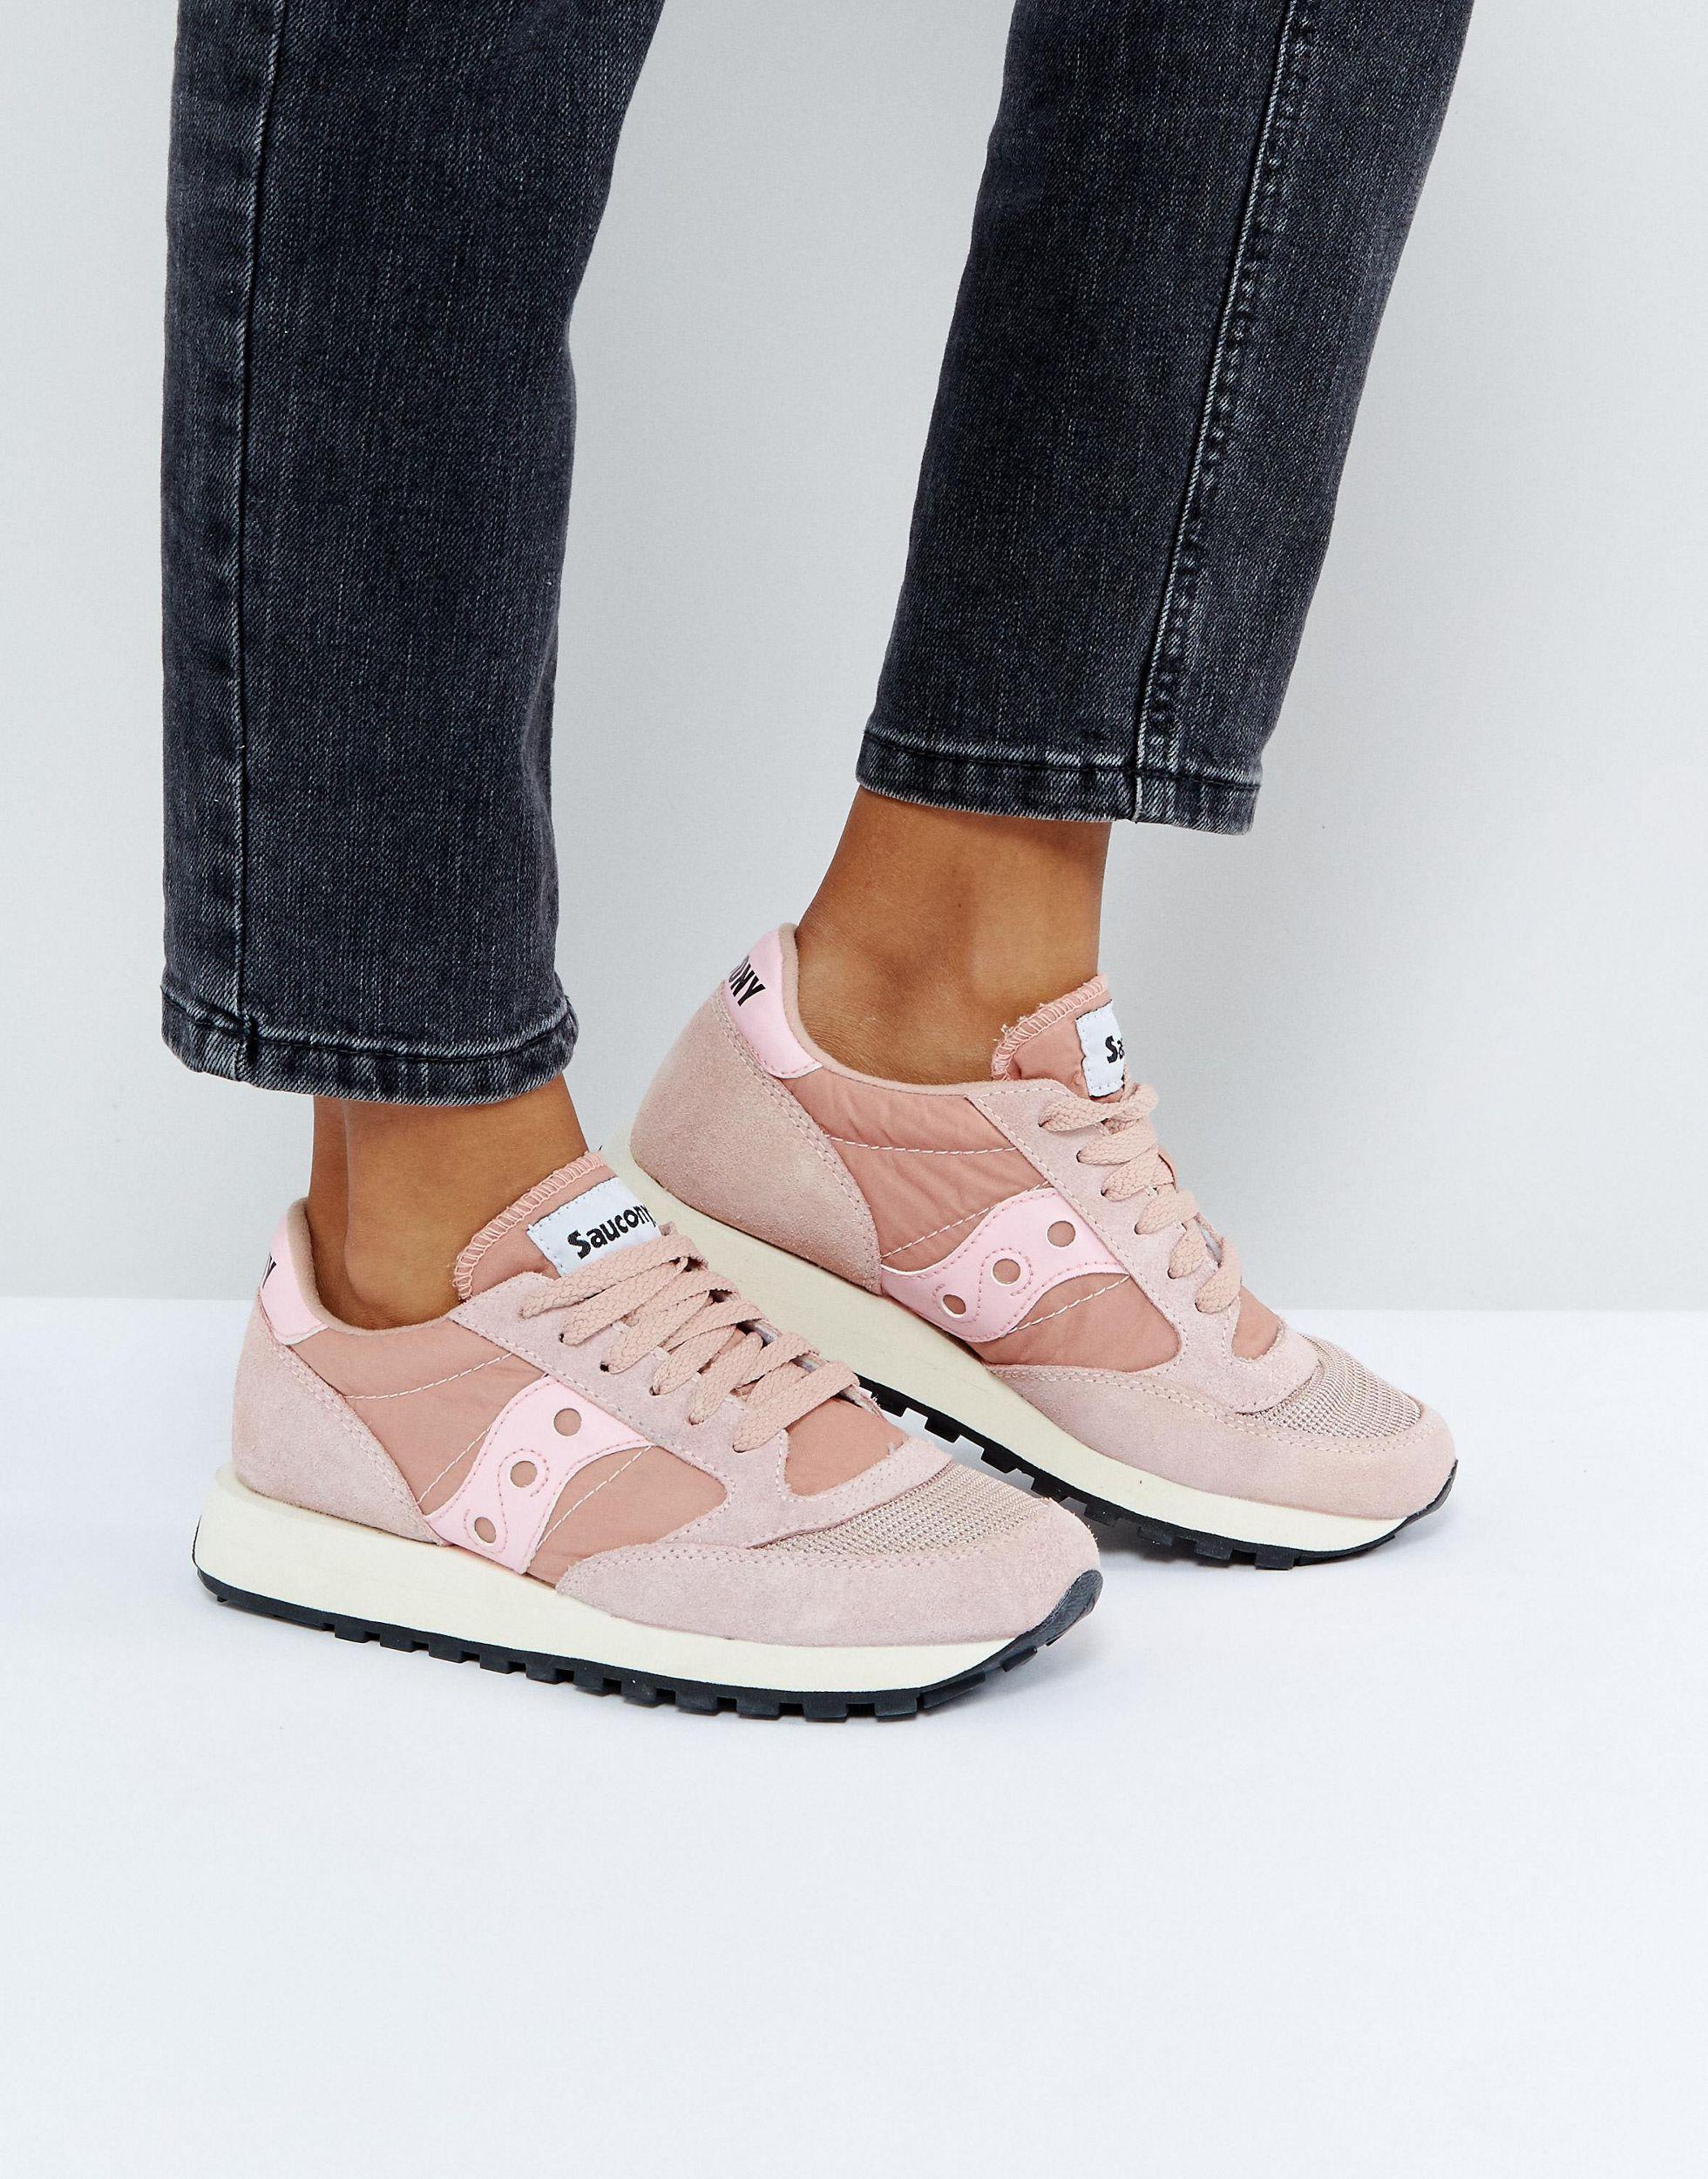 Saucony Suede Jazz O Vintage Sneakers in Pink - Lyst